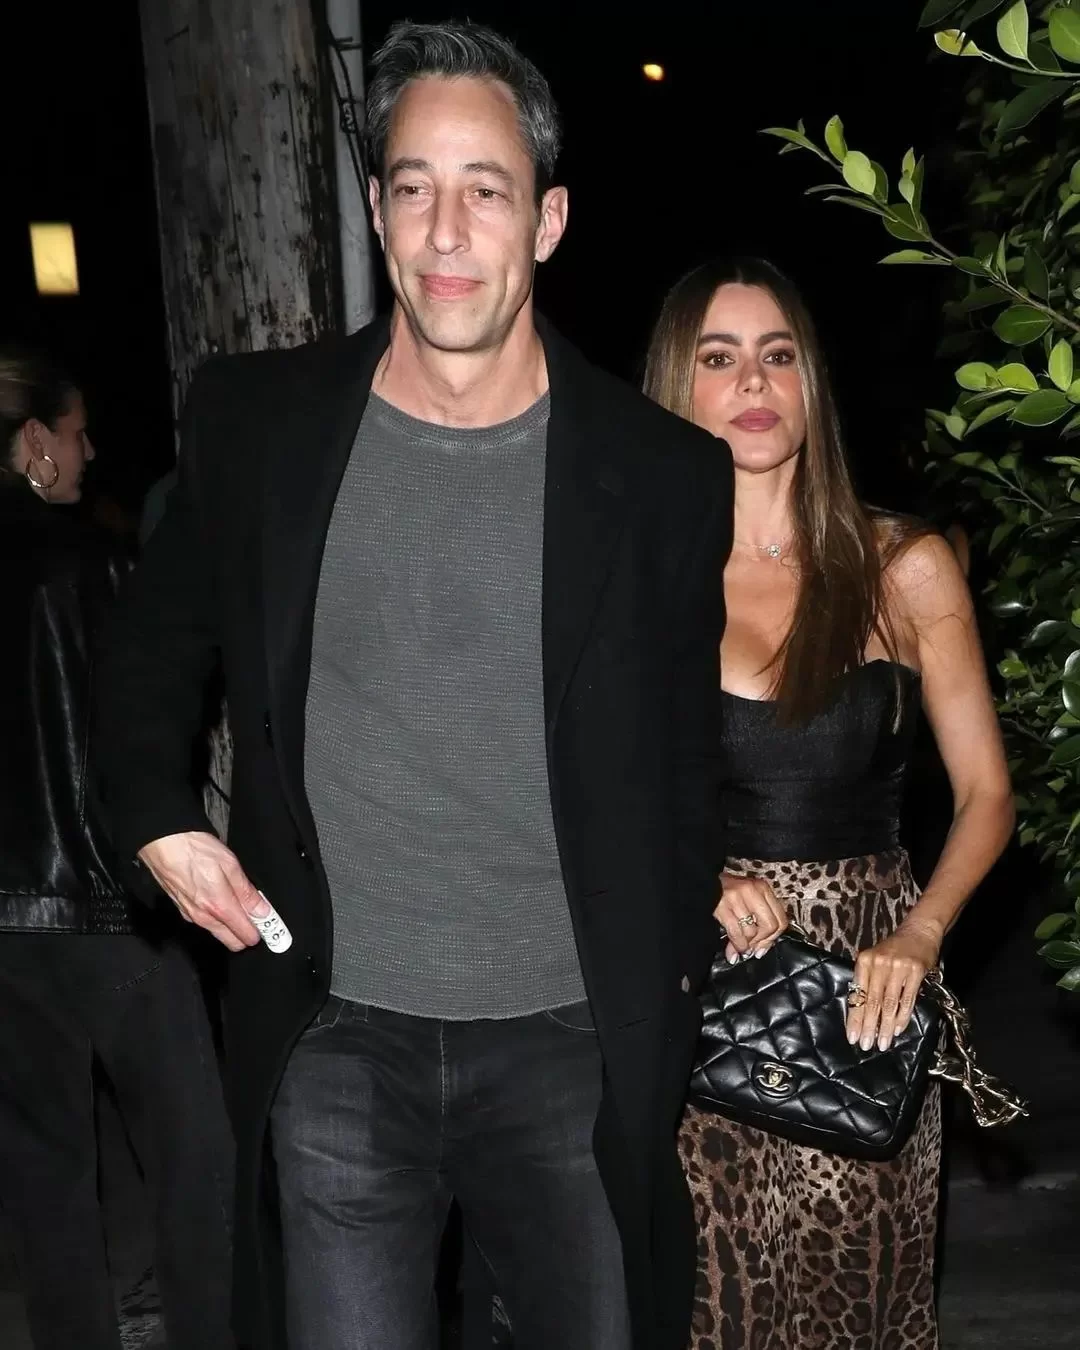 Justin Saliman and Sofía Vergara caught together (Photo: reproduction/Instagram/@hollywoodlucky) Lorena Bueri